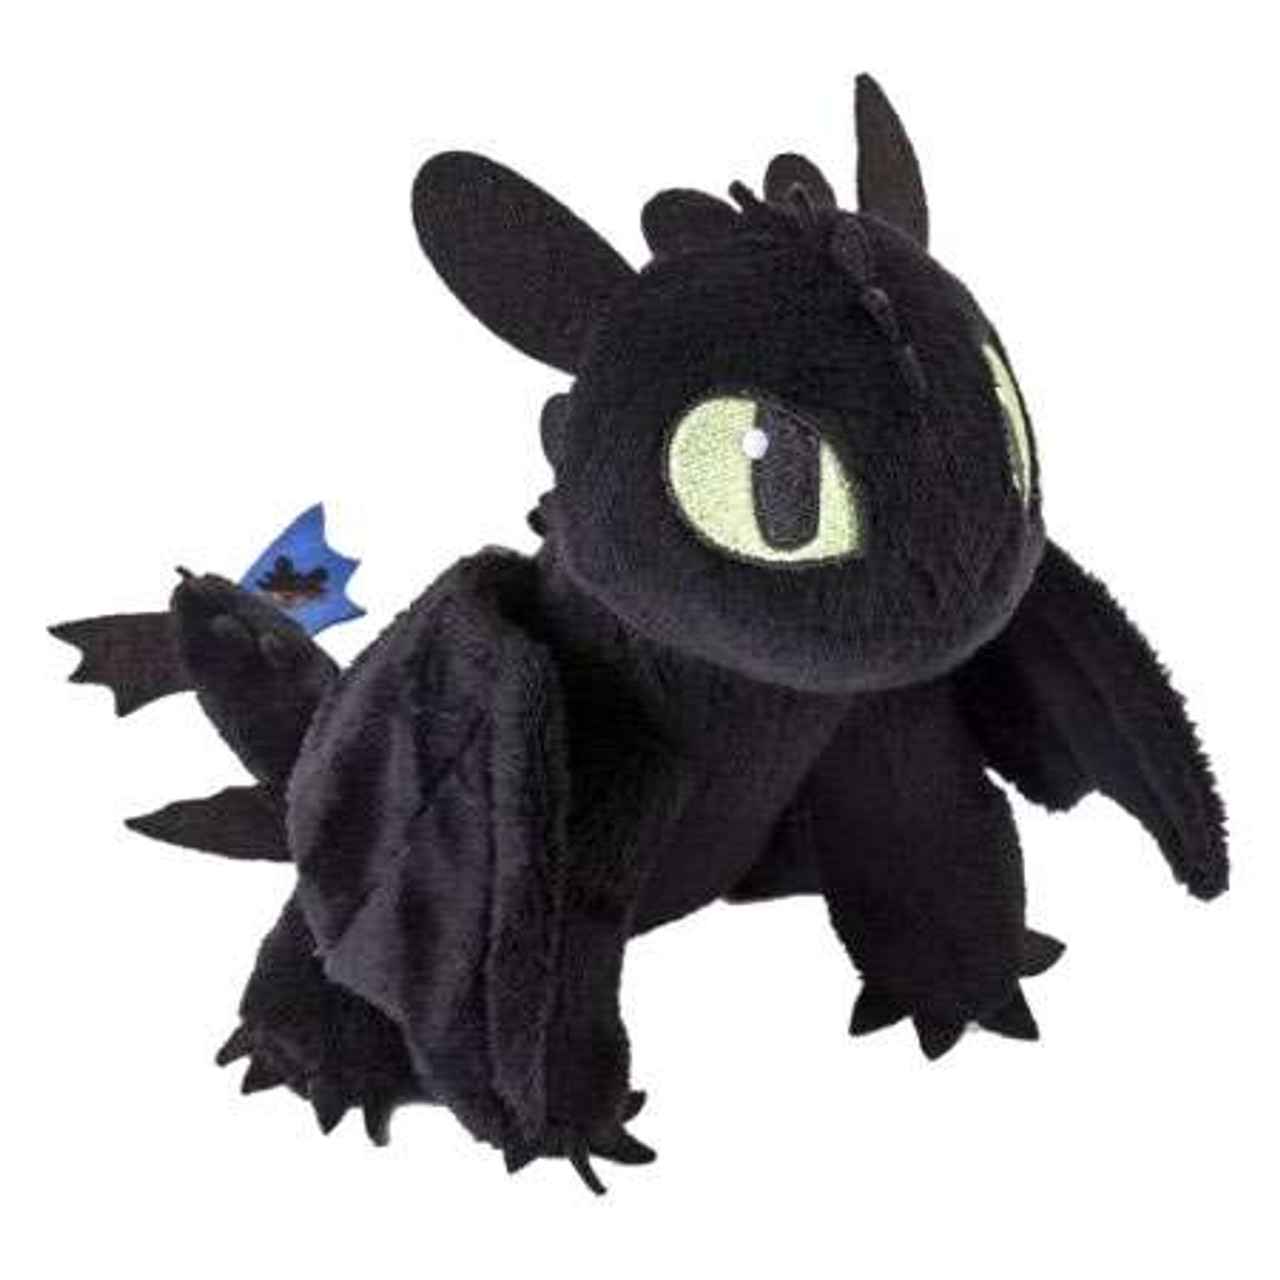 How To Train Your Dragon Race To The Edge Blue Tail Toothless 8 Plush Spin Master Toywiz - toothless roblox